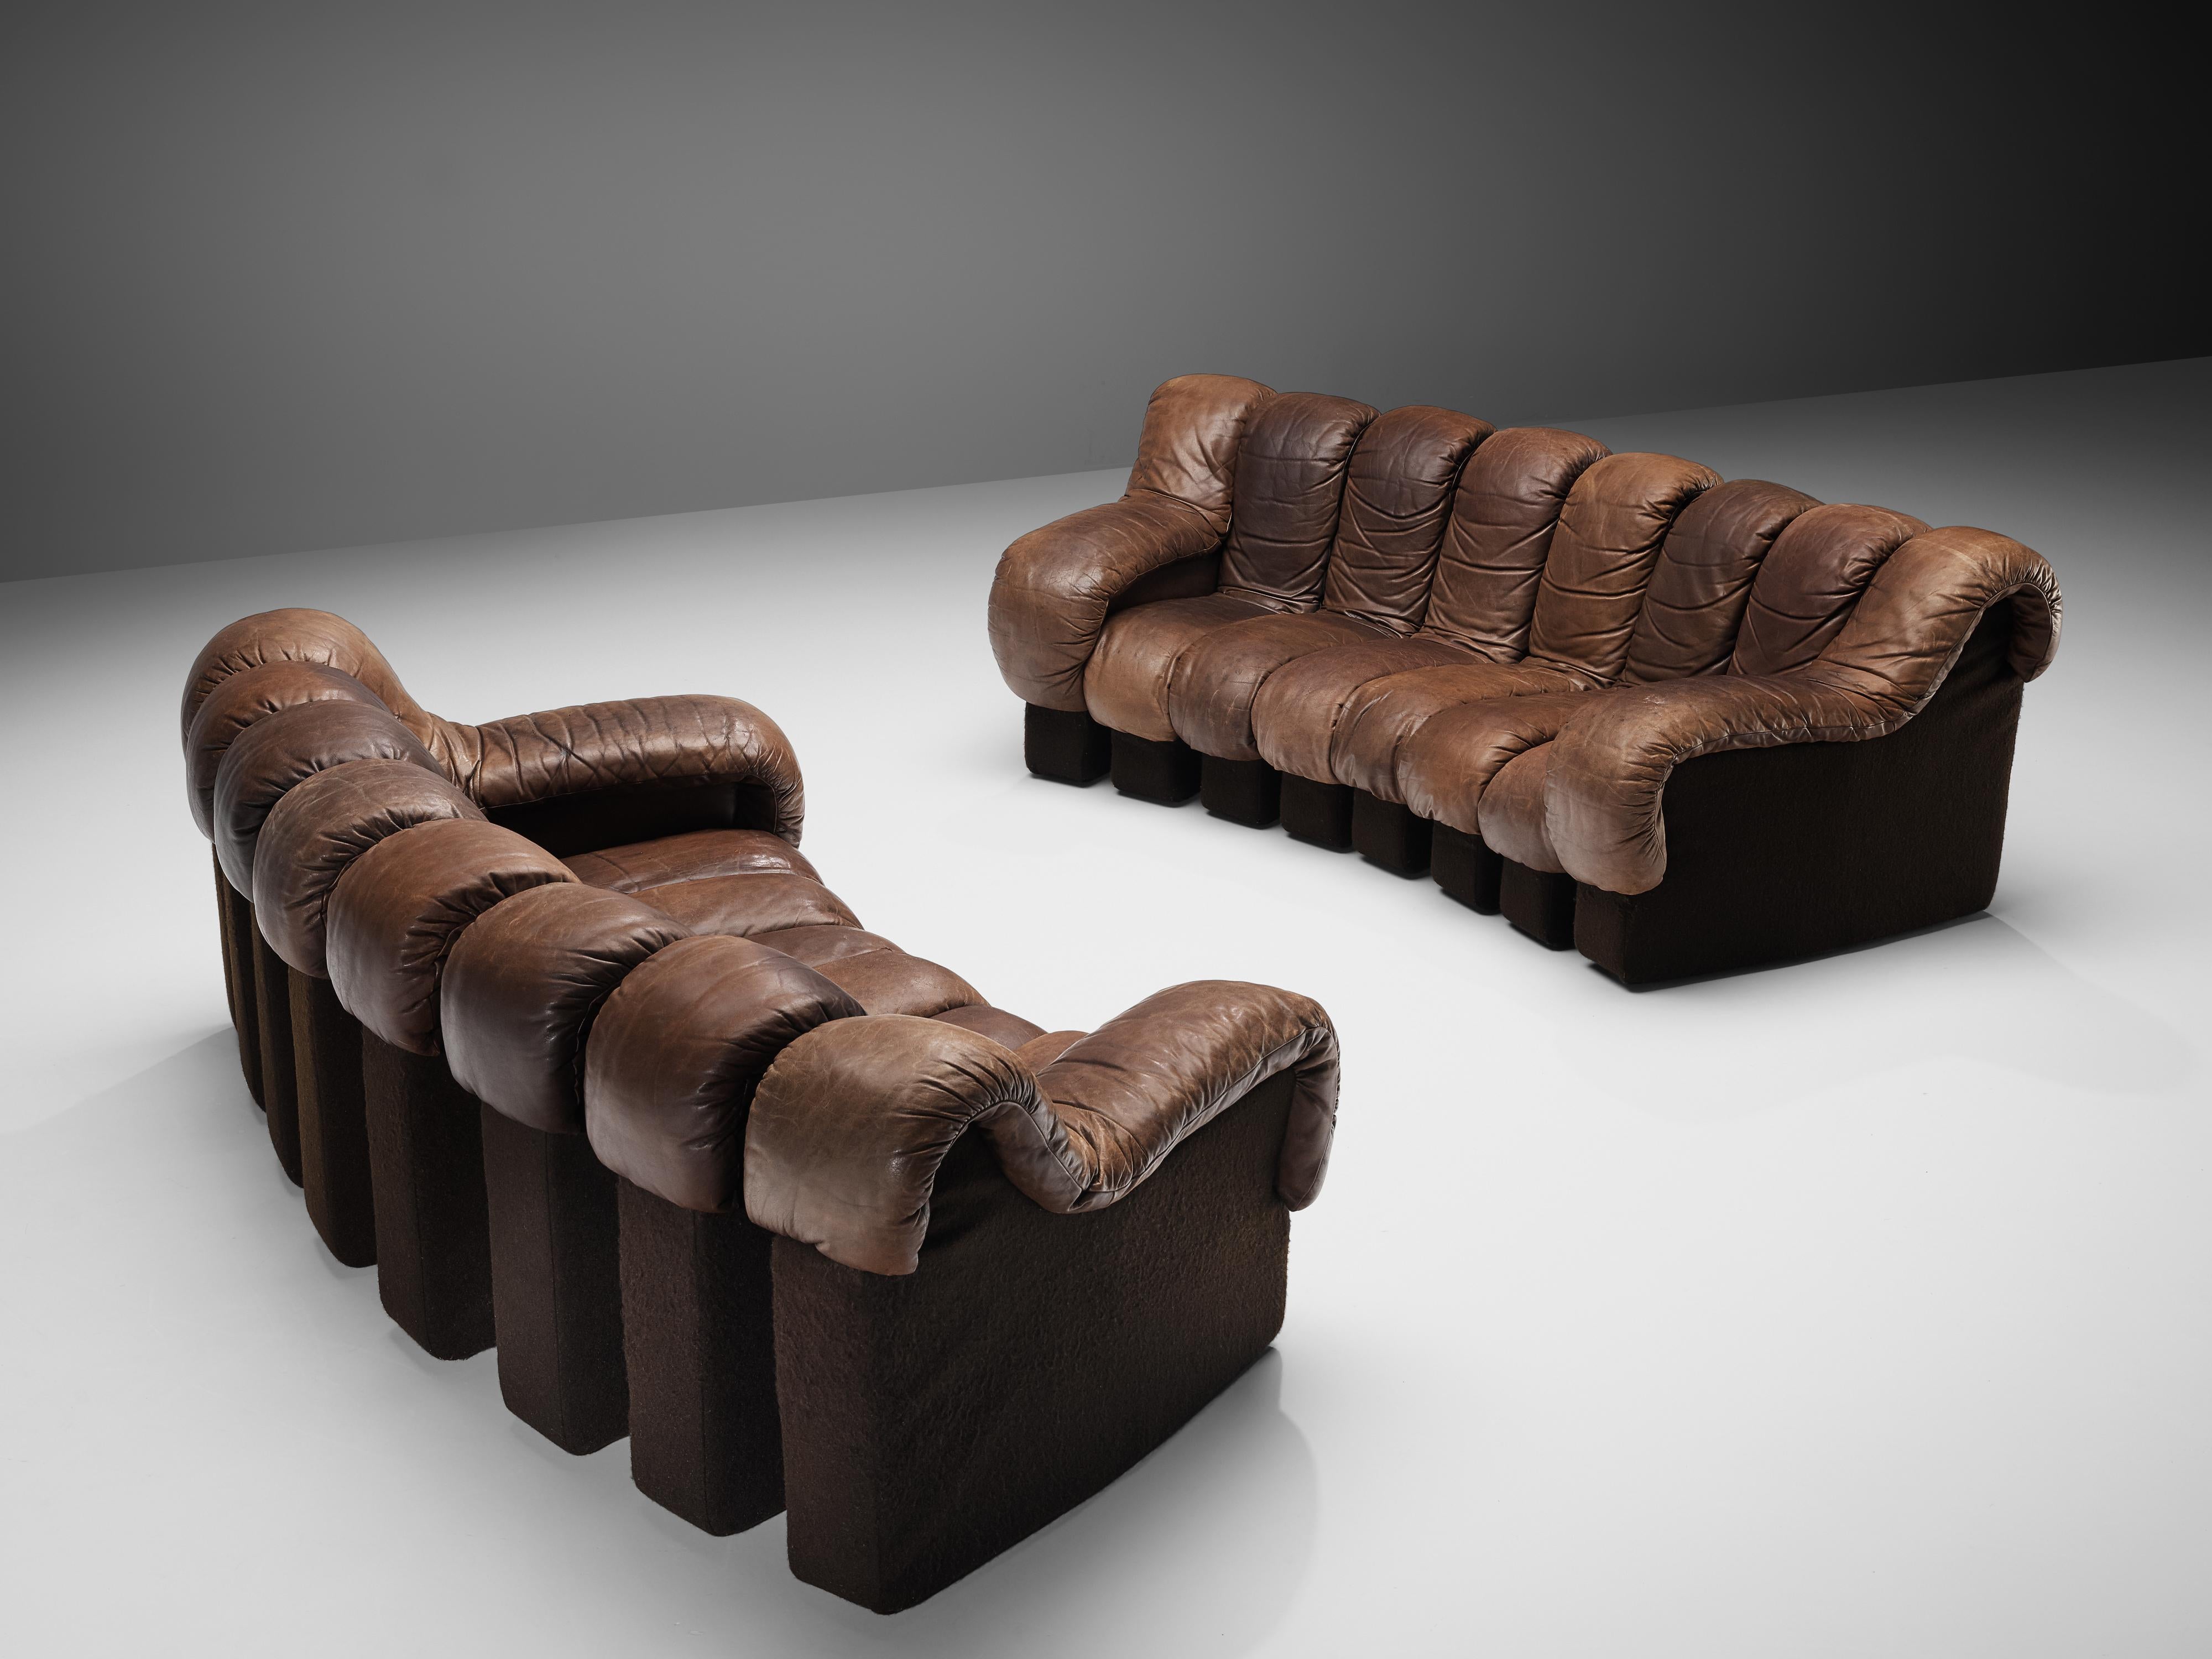 De Sede ‘Snake’ DS-600 sofas, brown leather, plastic, Switzerland, design 1972

De Sede 'Snake' sofa in smooth brown leather with patina. A design by Ueli Bergere, Elenora Peduzzi-Riva, Heinz Ulrich and Klaus Vogt at DeSede, Switzerland. De Sede